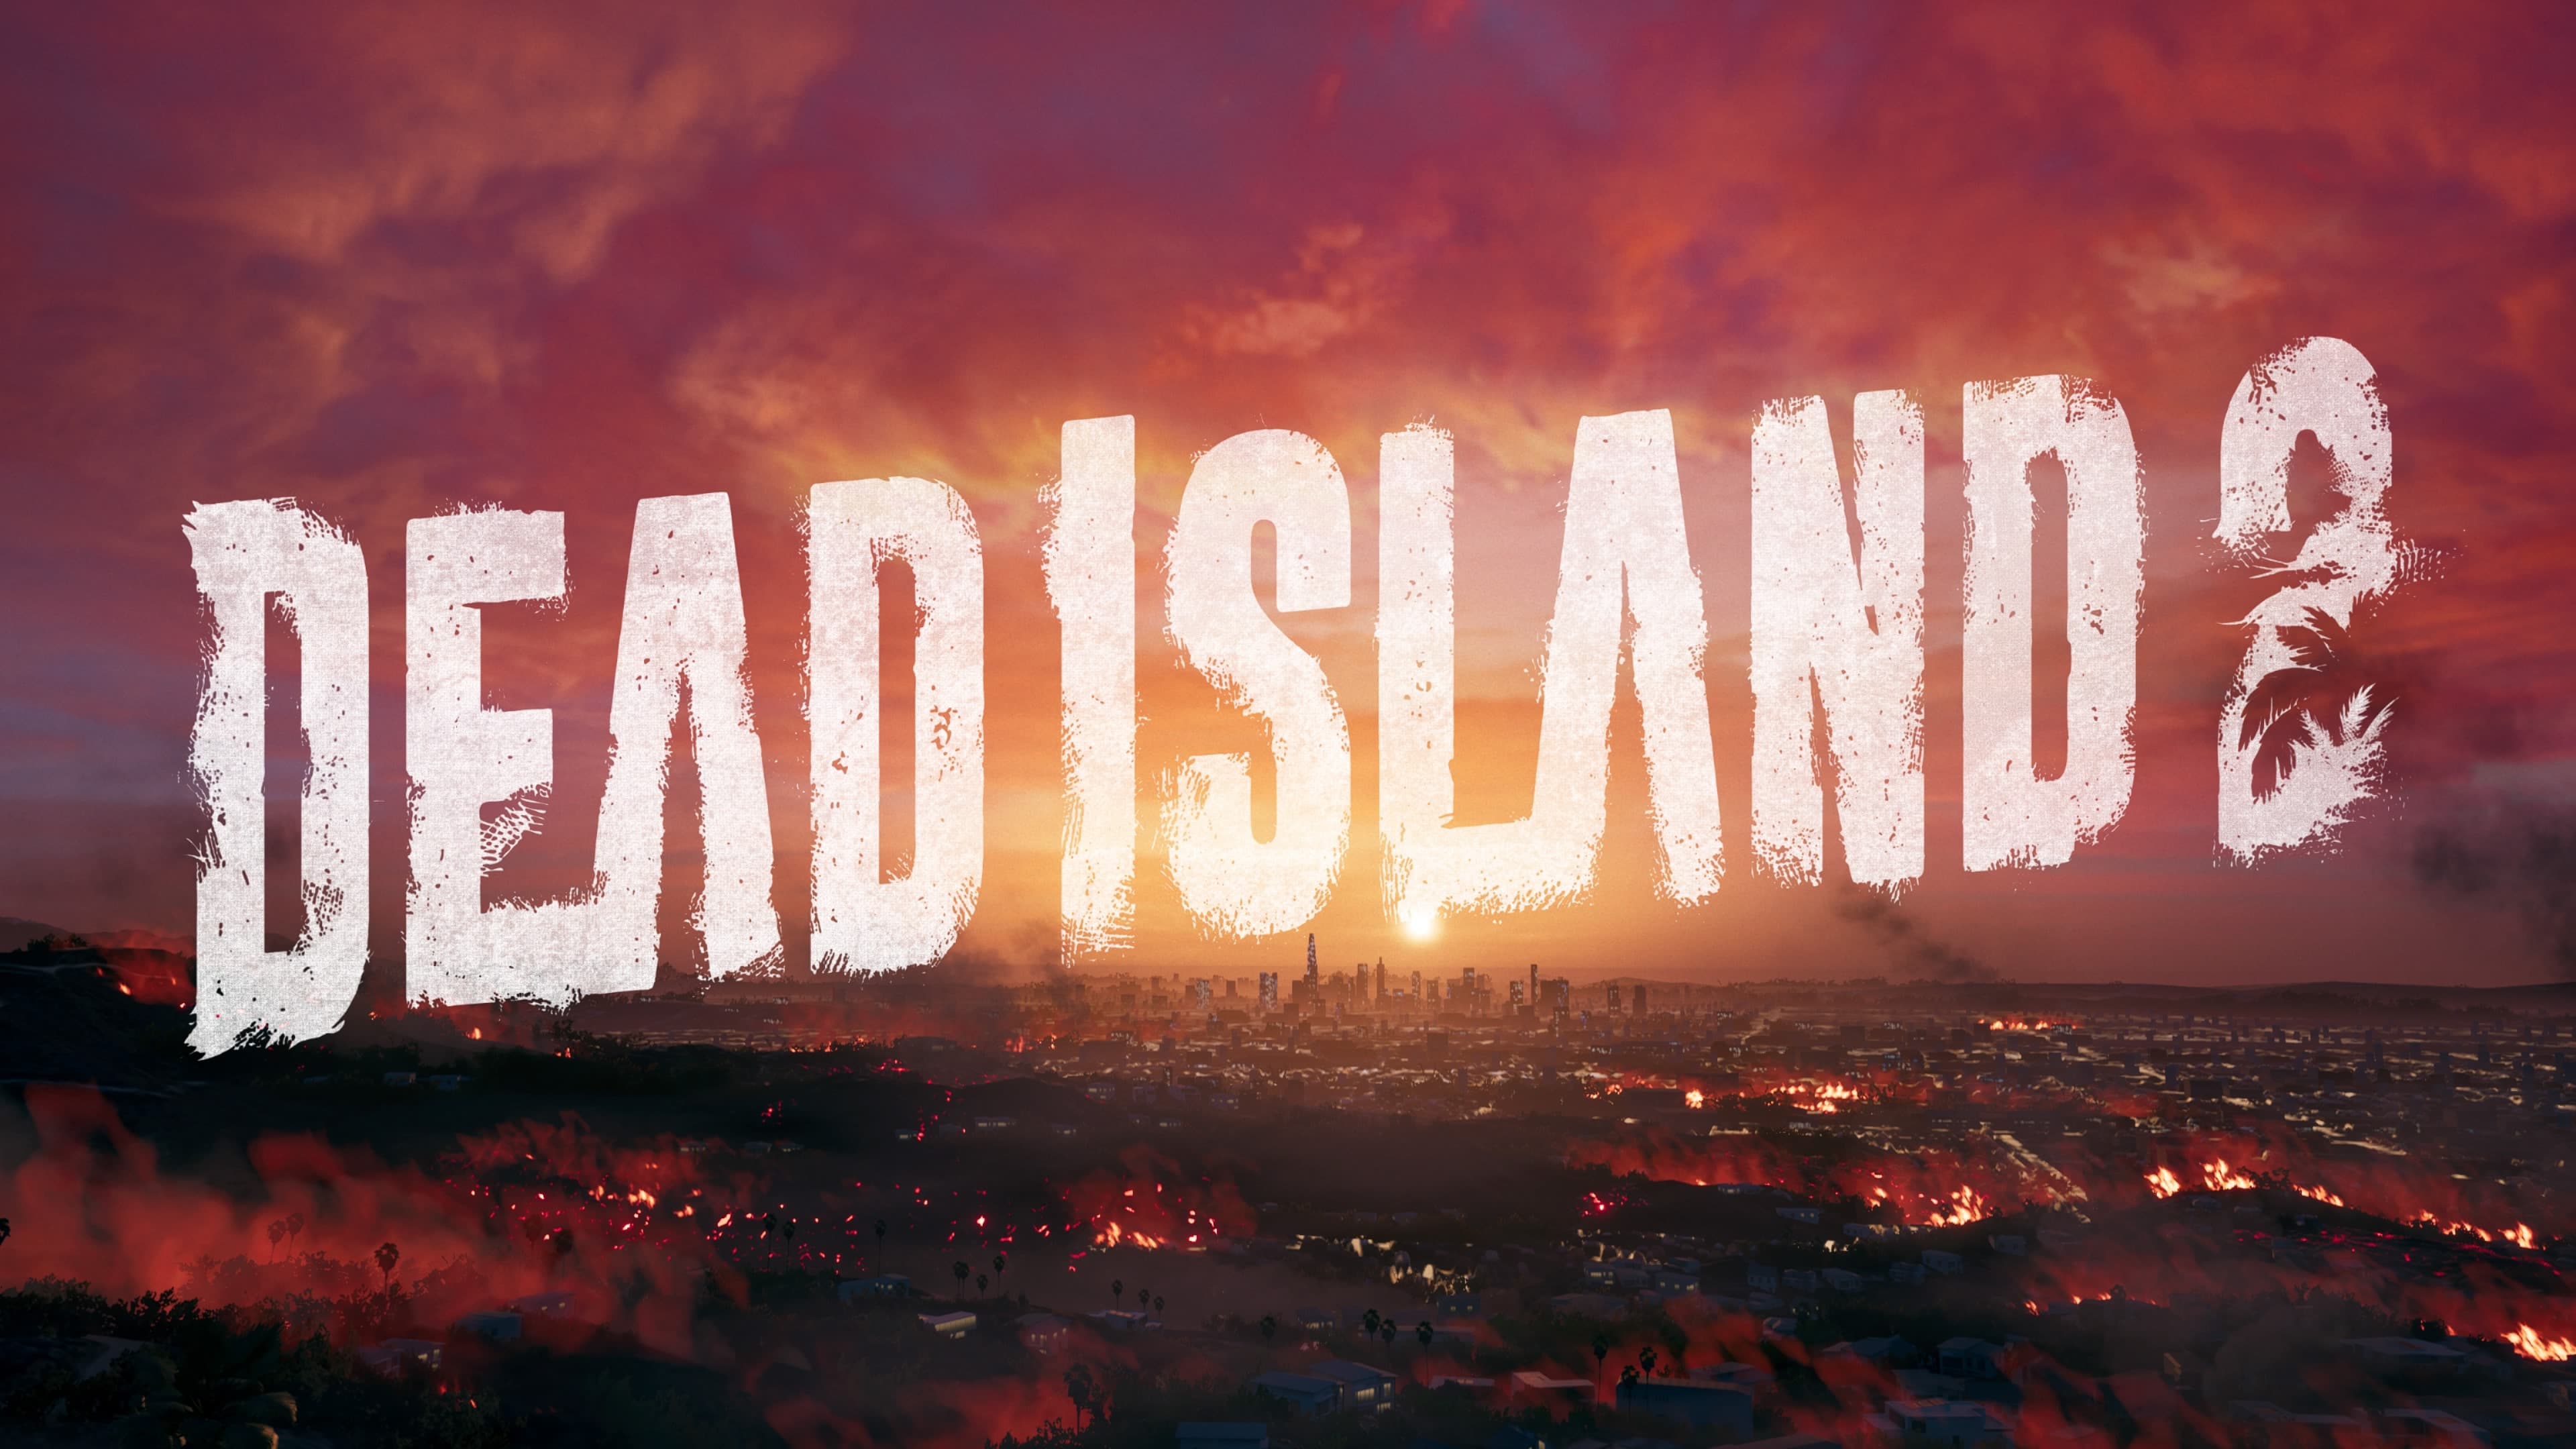 Will Dead Island 2 Have DLC? - Answered - Prima Games